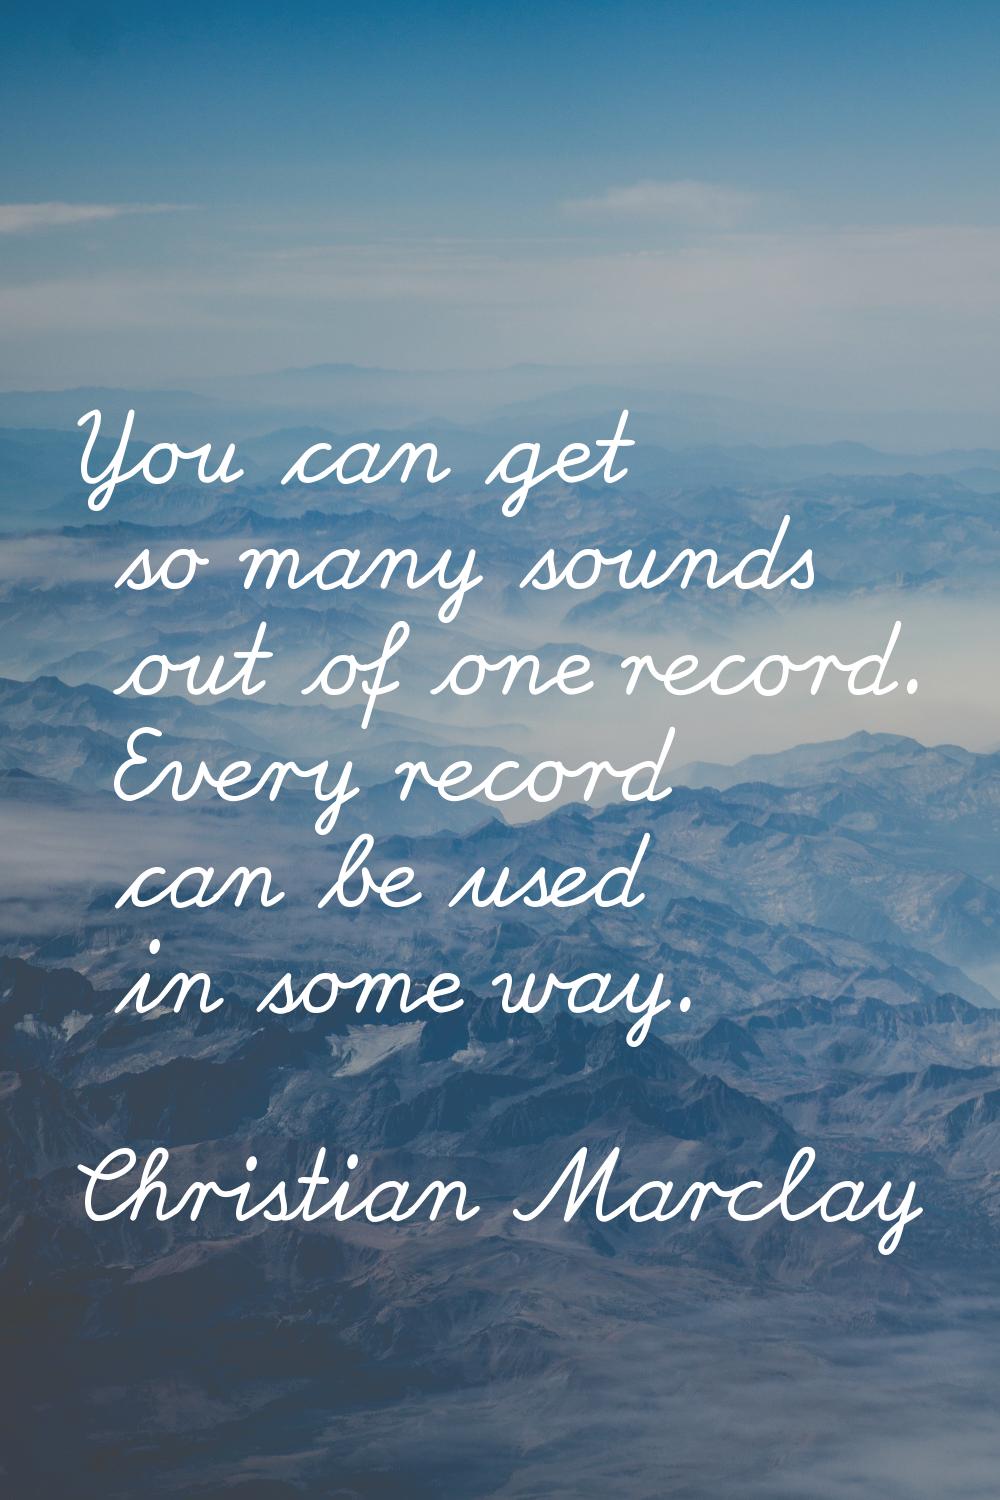 You can get so many sounds out of one record. Every record can be used in some way.